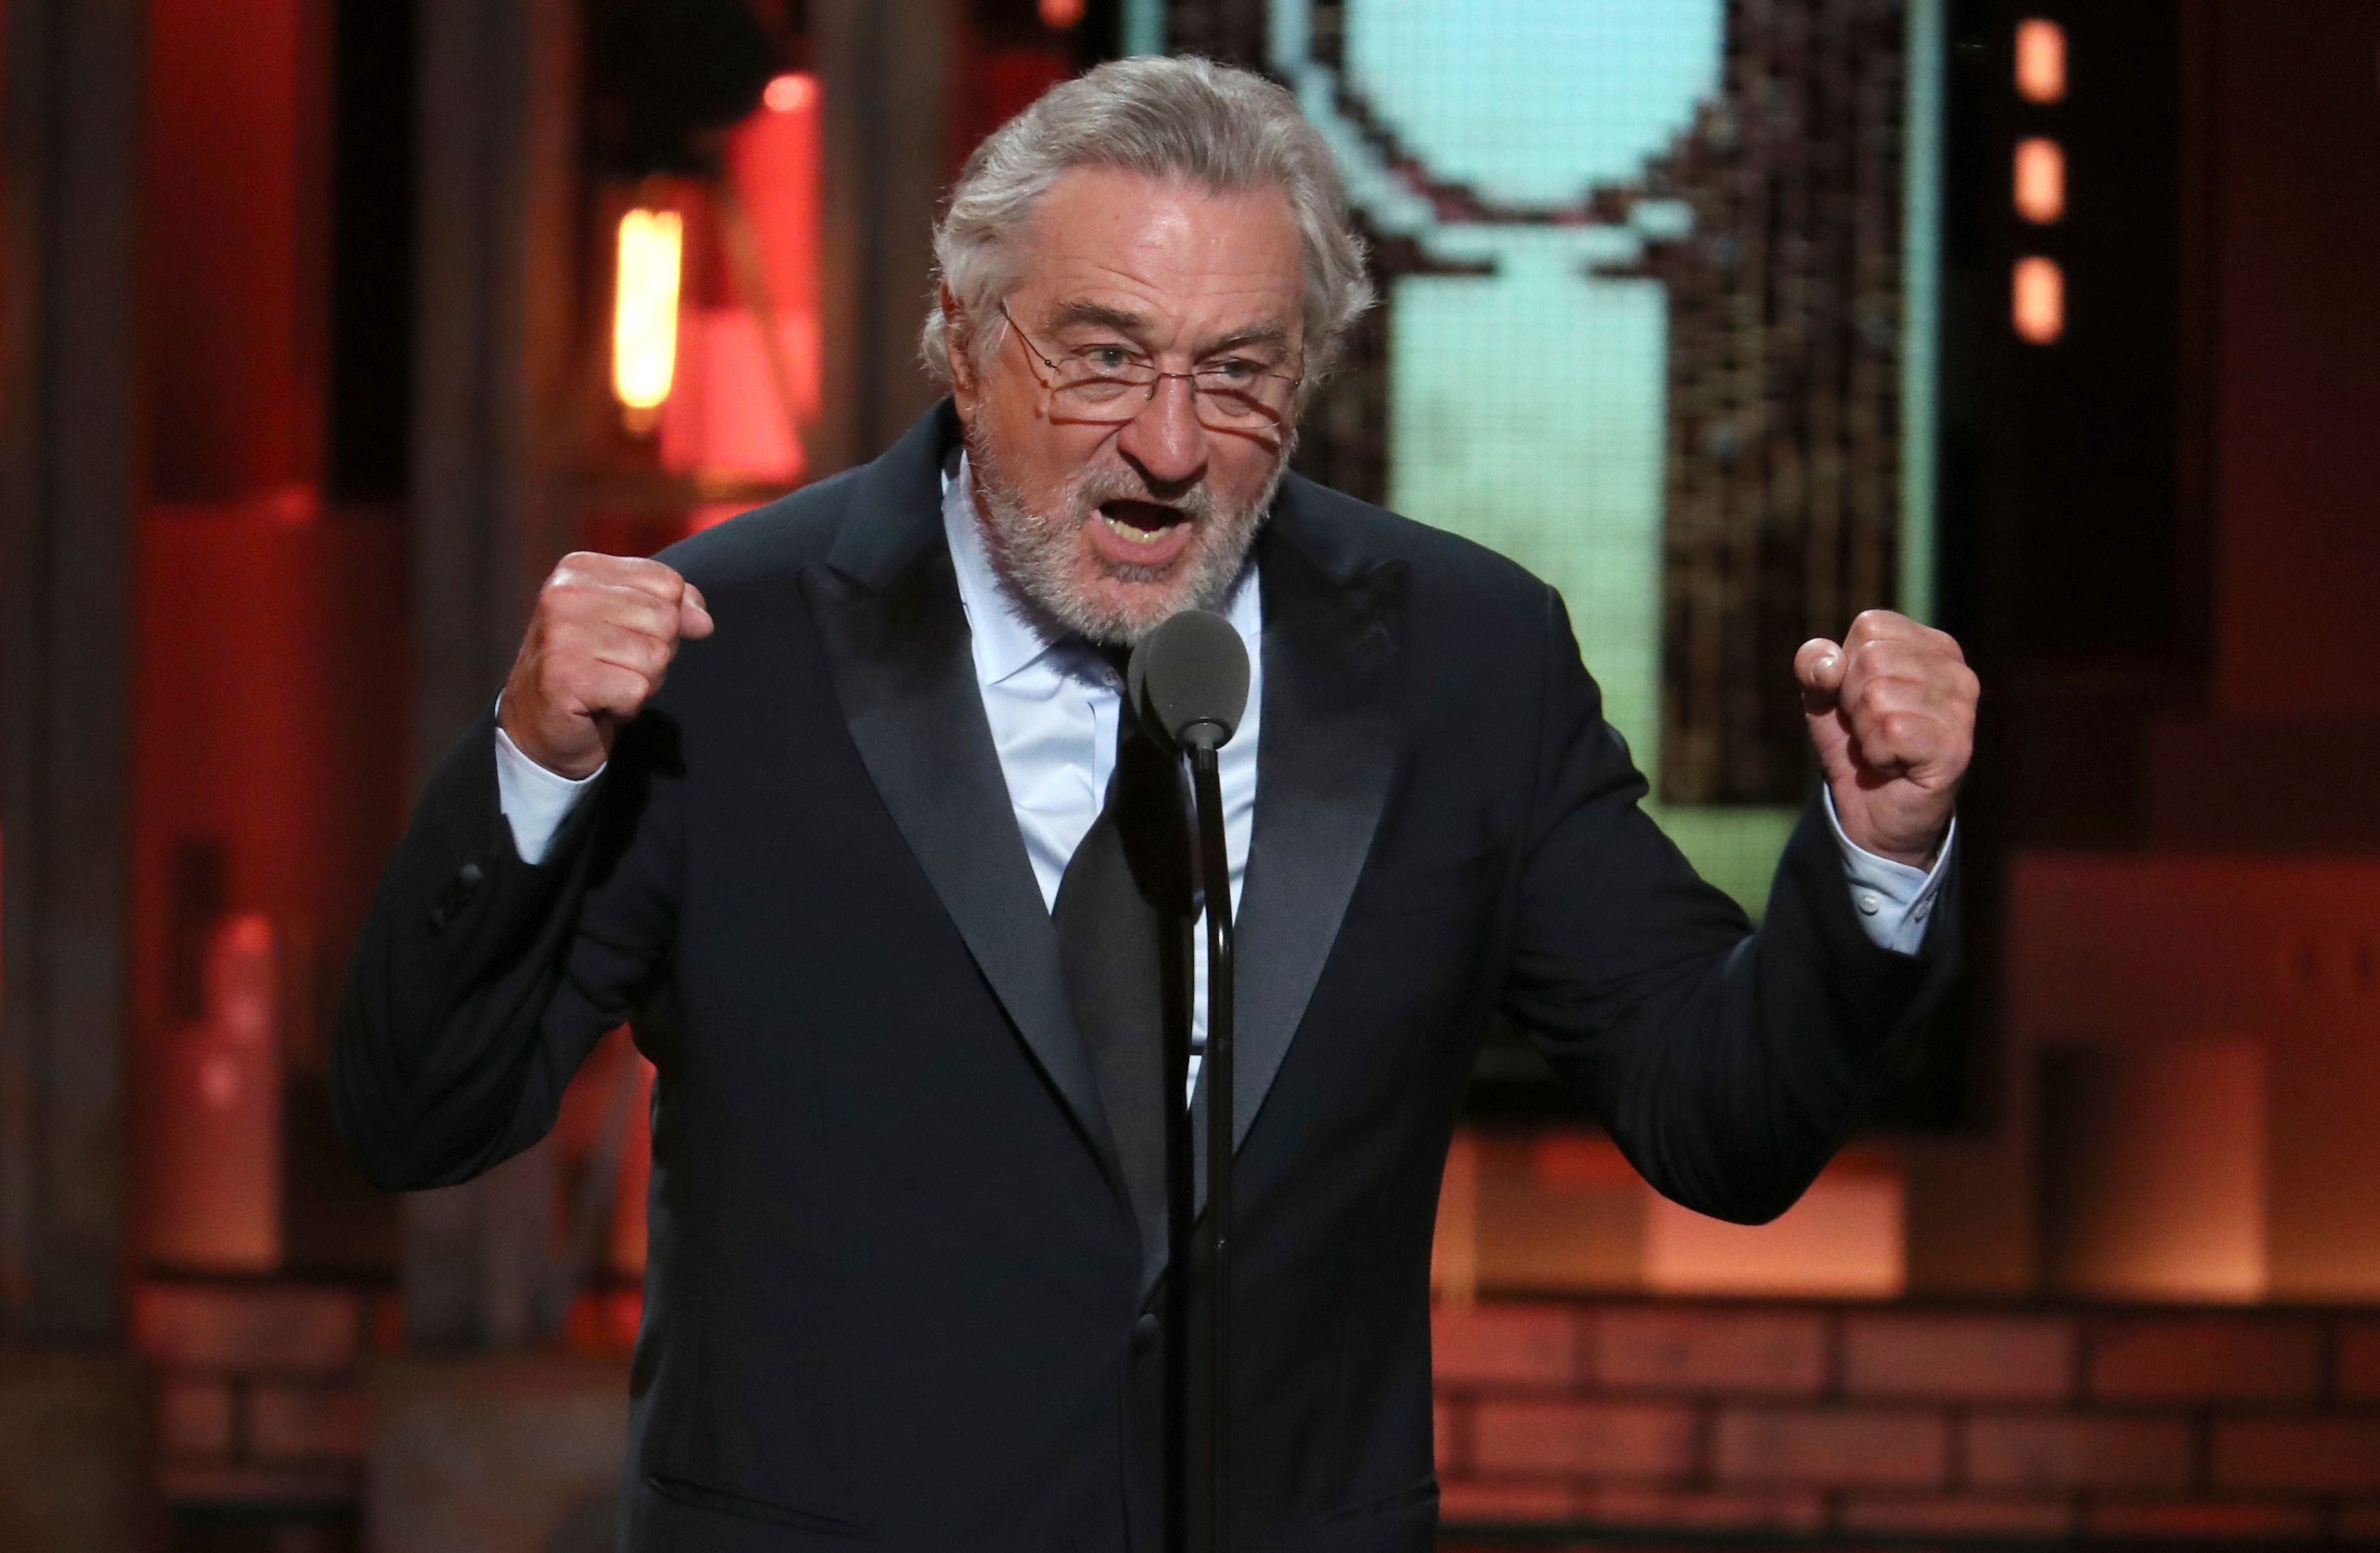 Robert De Niro introduces a performance by Bruce Springsteen at the 72nd annual Tony Awards